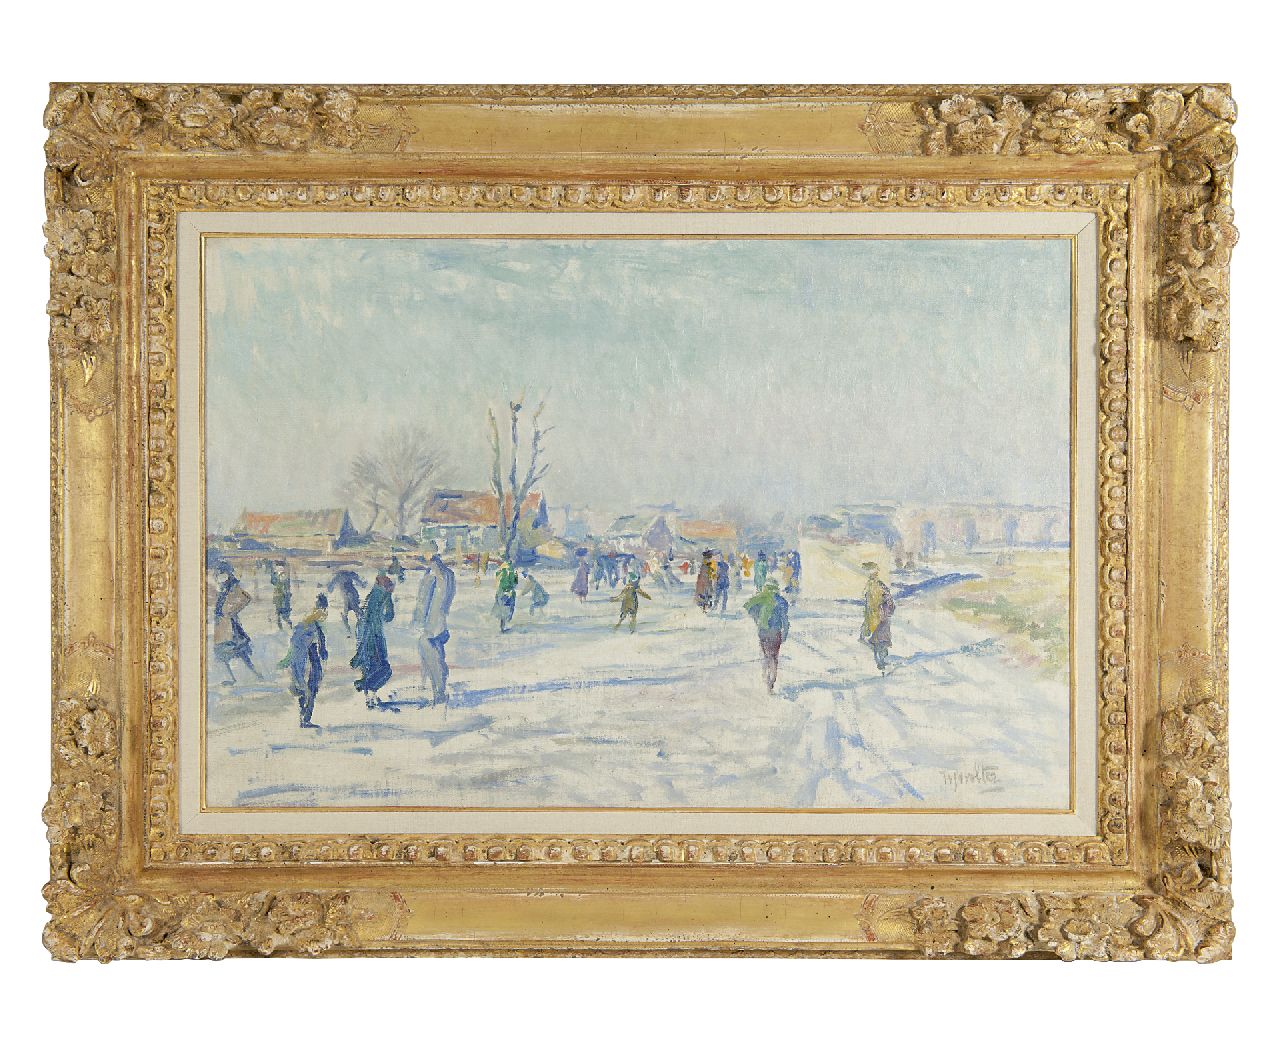 Wolter H.J.  | Hendrik Jan 'Henk' Wolter | Paintings offered for sale | Skaters on the Boerenwetering, Amsterdam, oil on canvas 40.5 x 60.6 cm, signed l.r. and carries studiostamp on the reverse and painted ca 1915